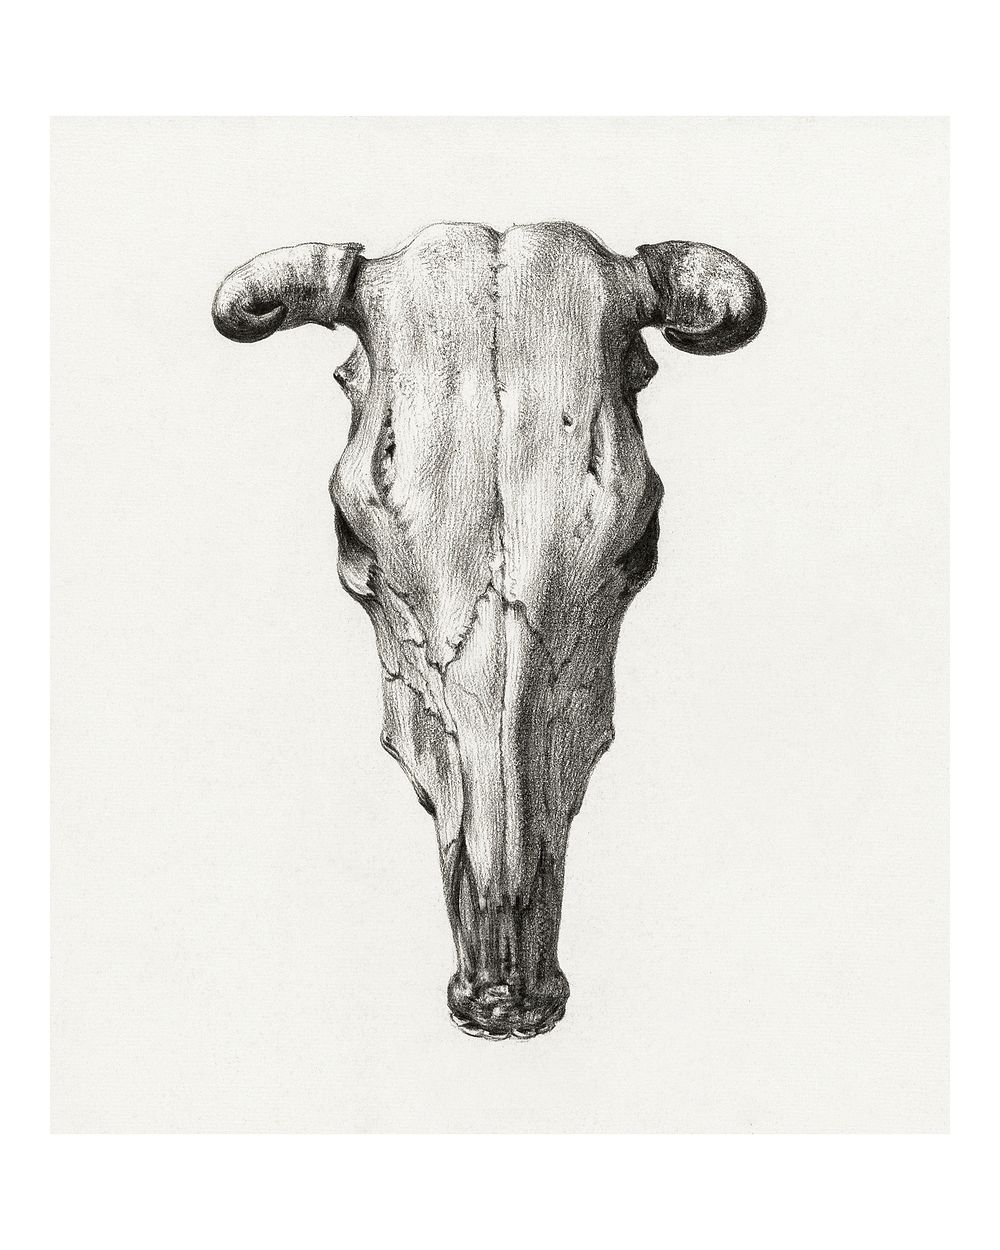 Skull of a cow vintage illustration wall art print and poster design remix from original artwork.